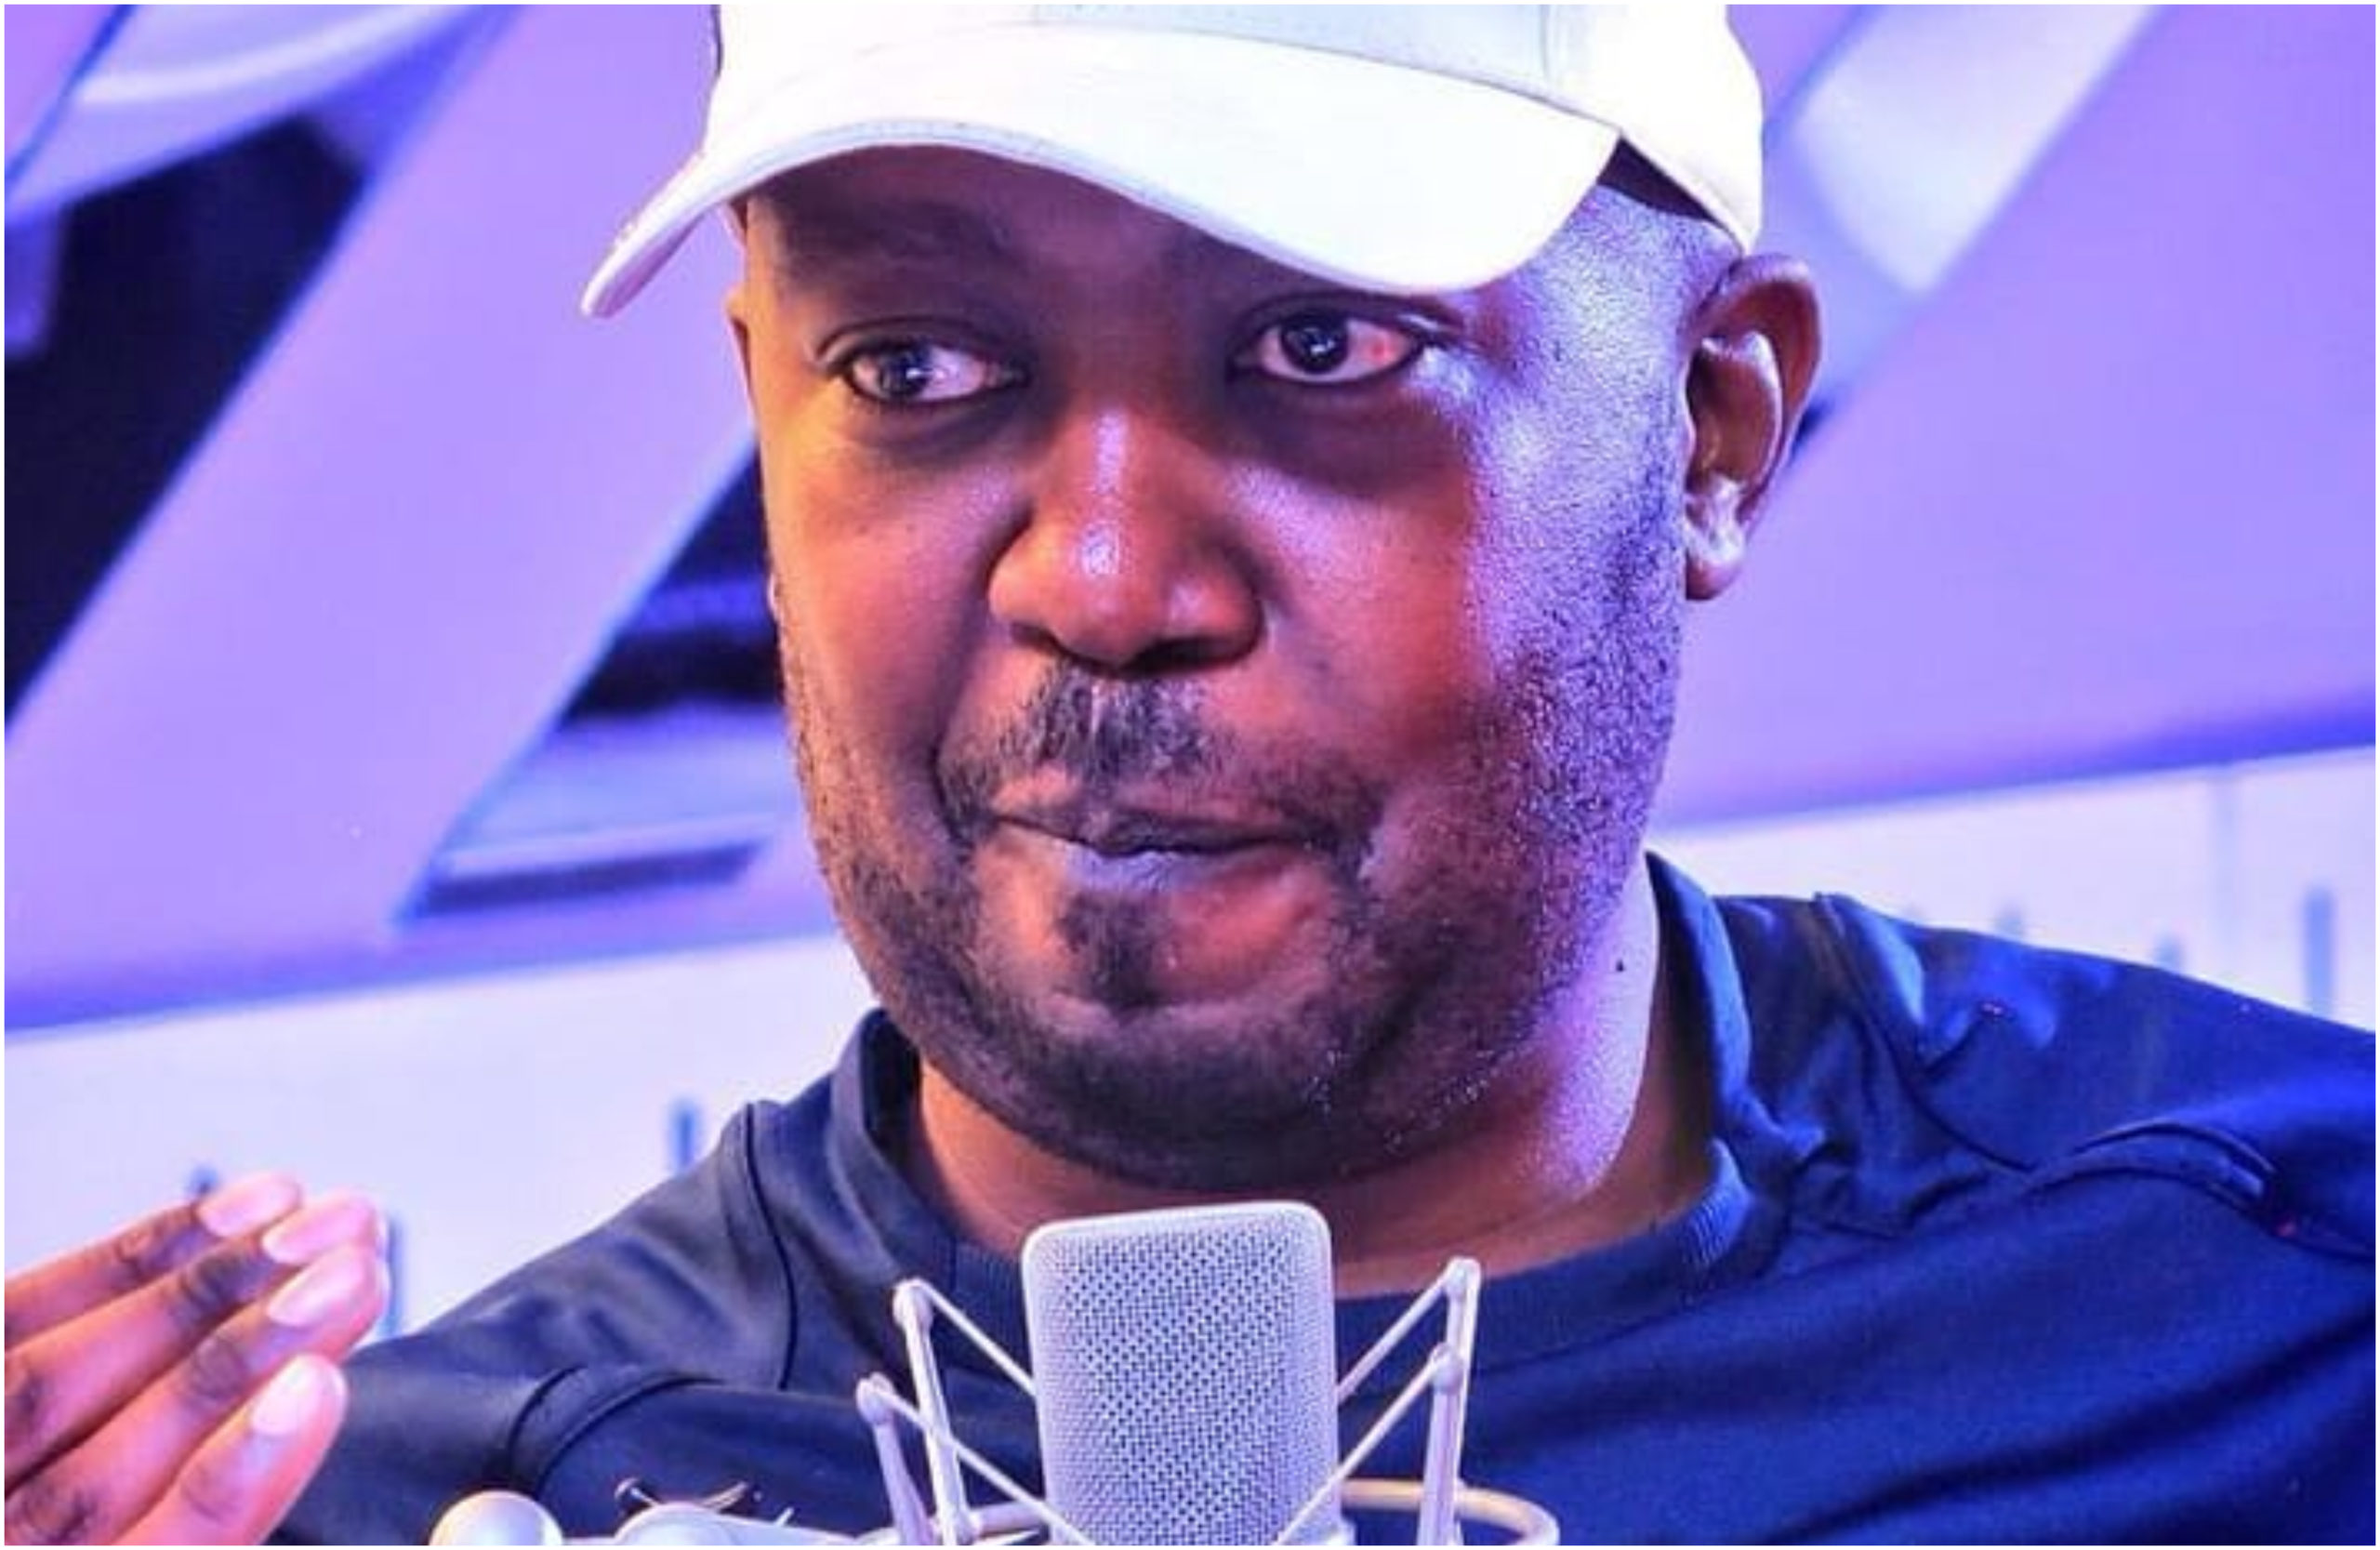 A look inside Andrew Kibe’s newly unveiled station ‘Rogue Radio’ (Video)